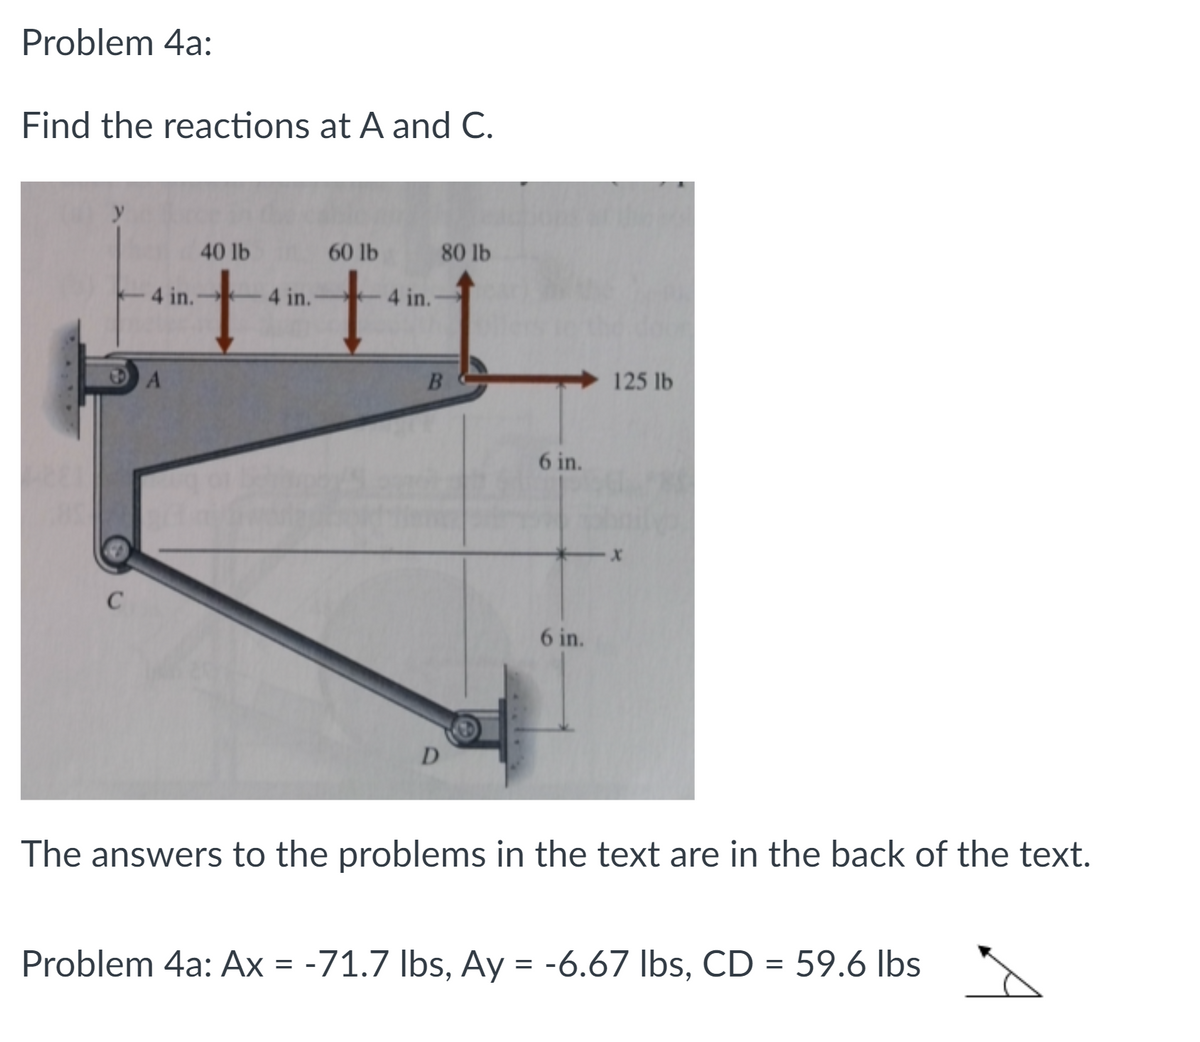 Problem 4a:
Find the reactions at A and C.
40 lb
60 lb
80 lb
t
4 in.
4 in.-
4 in.
125 lb
6 in.
6 in.
D.
The answers to the problems in the text are in the back of the text.
Problem 4a: Ax = -71.7 Ibs, Ay = -6.67 Ibs, CD = 59.6 lbs
